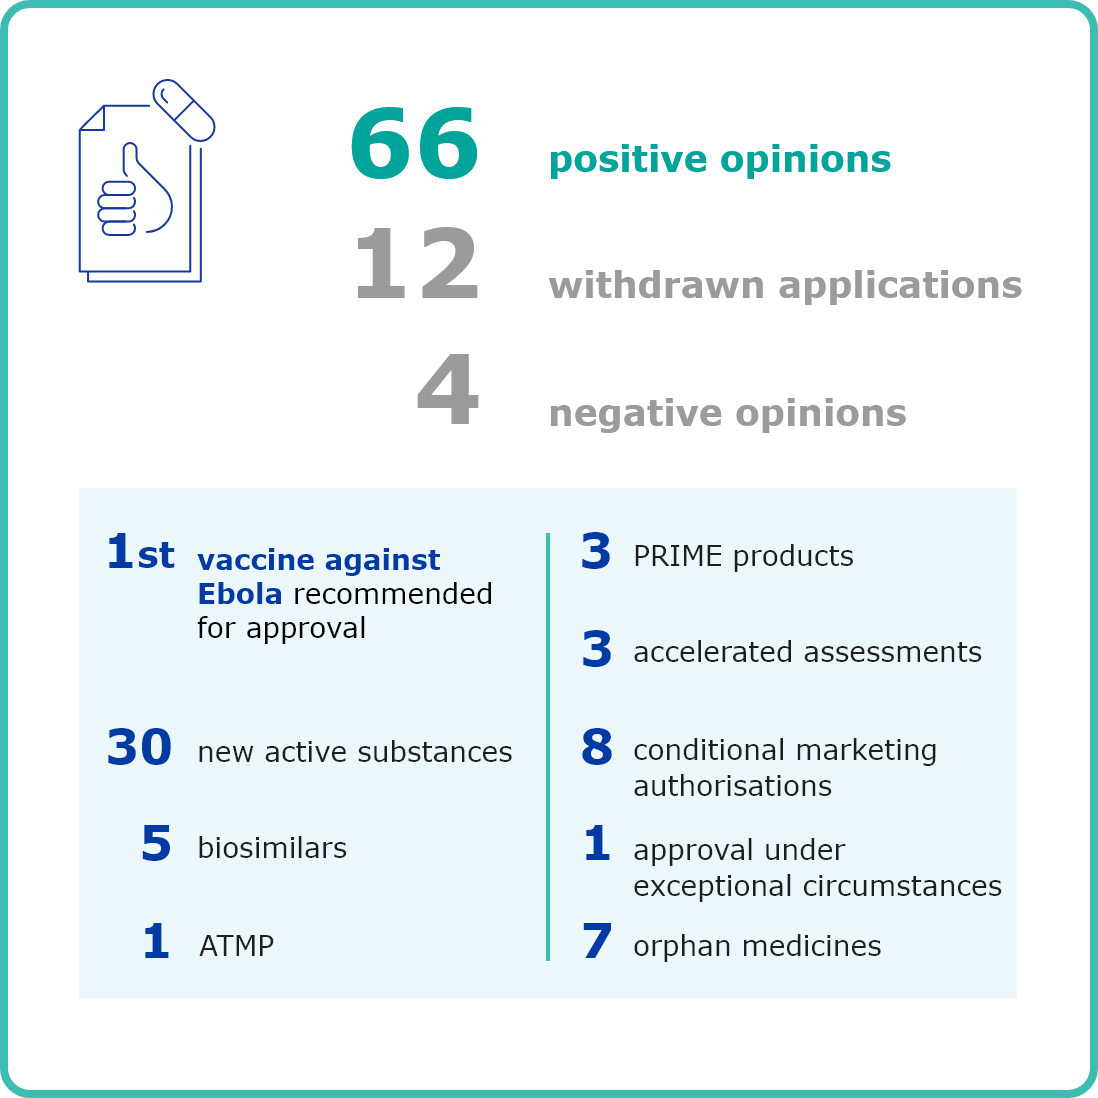 66 positive opinions - 12 withdrawn applications - 4 negative opinions